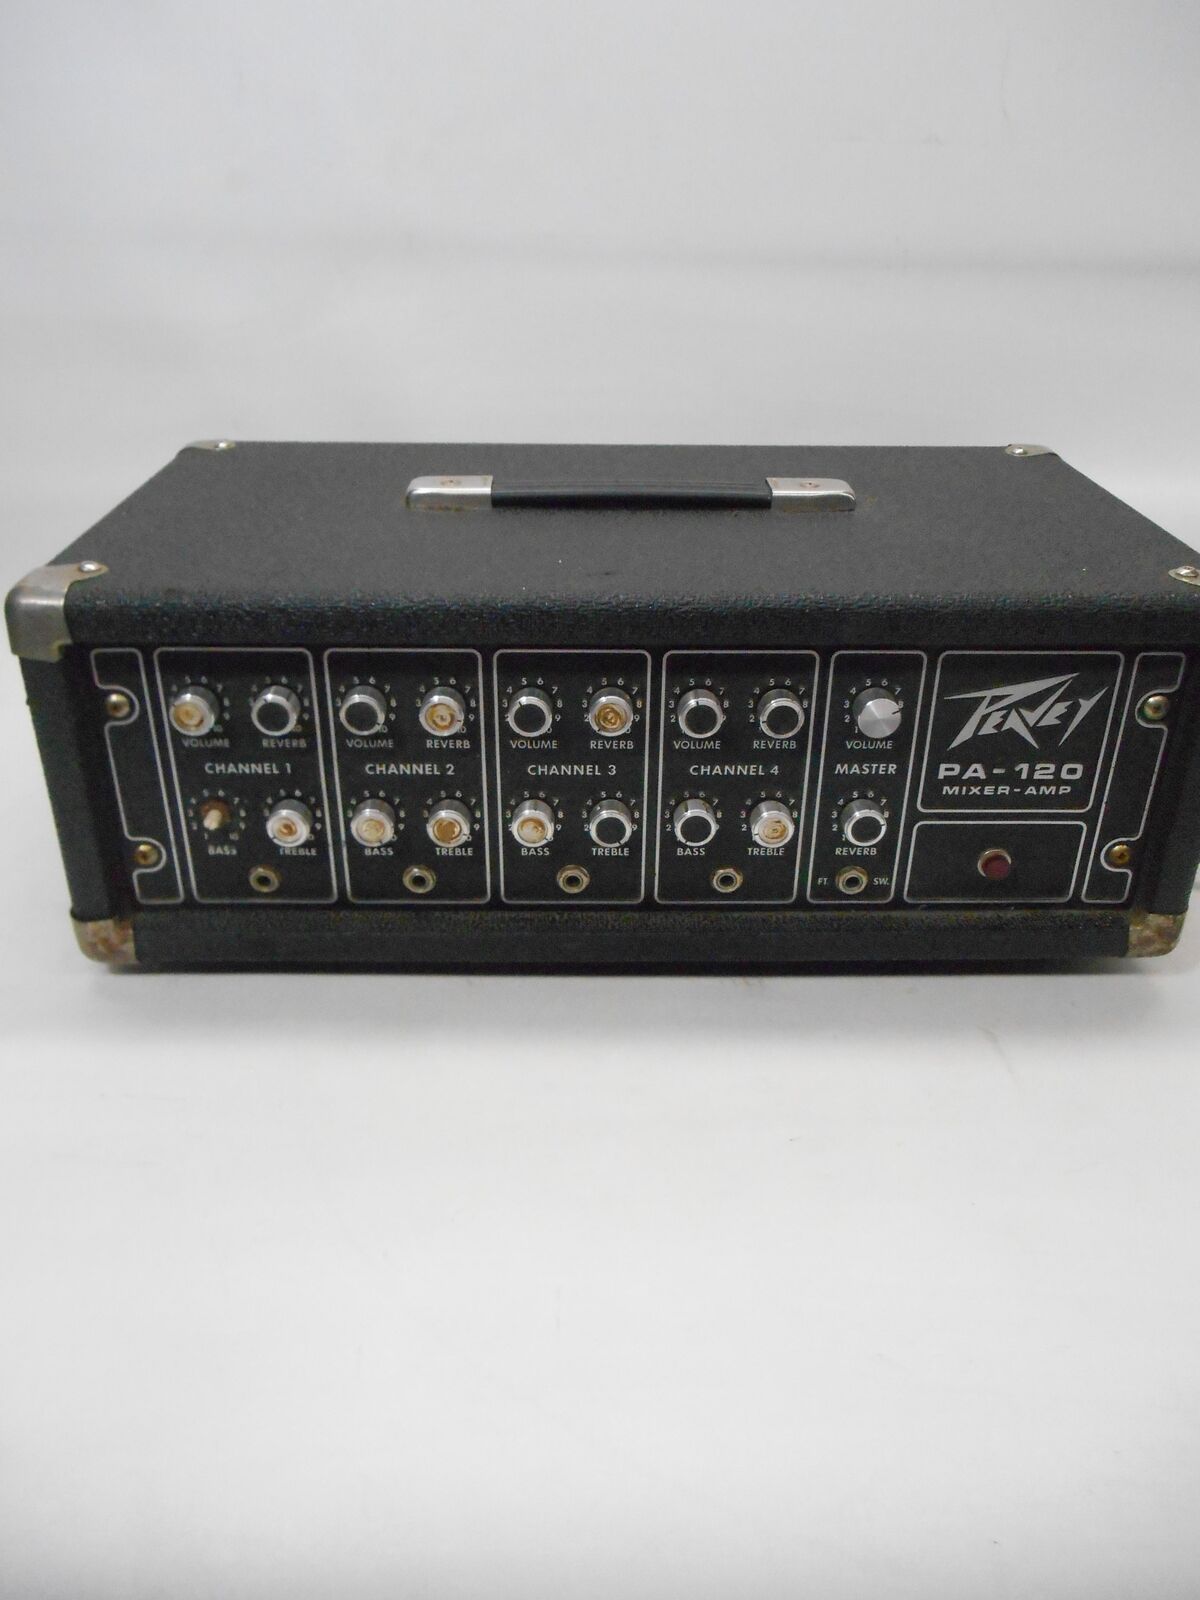 Peavey Pa-120 4 Channel Mixer/amp.